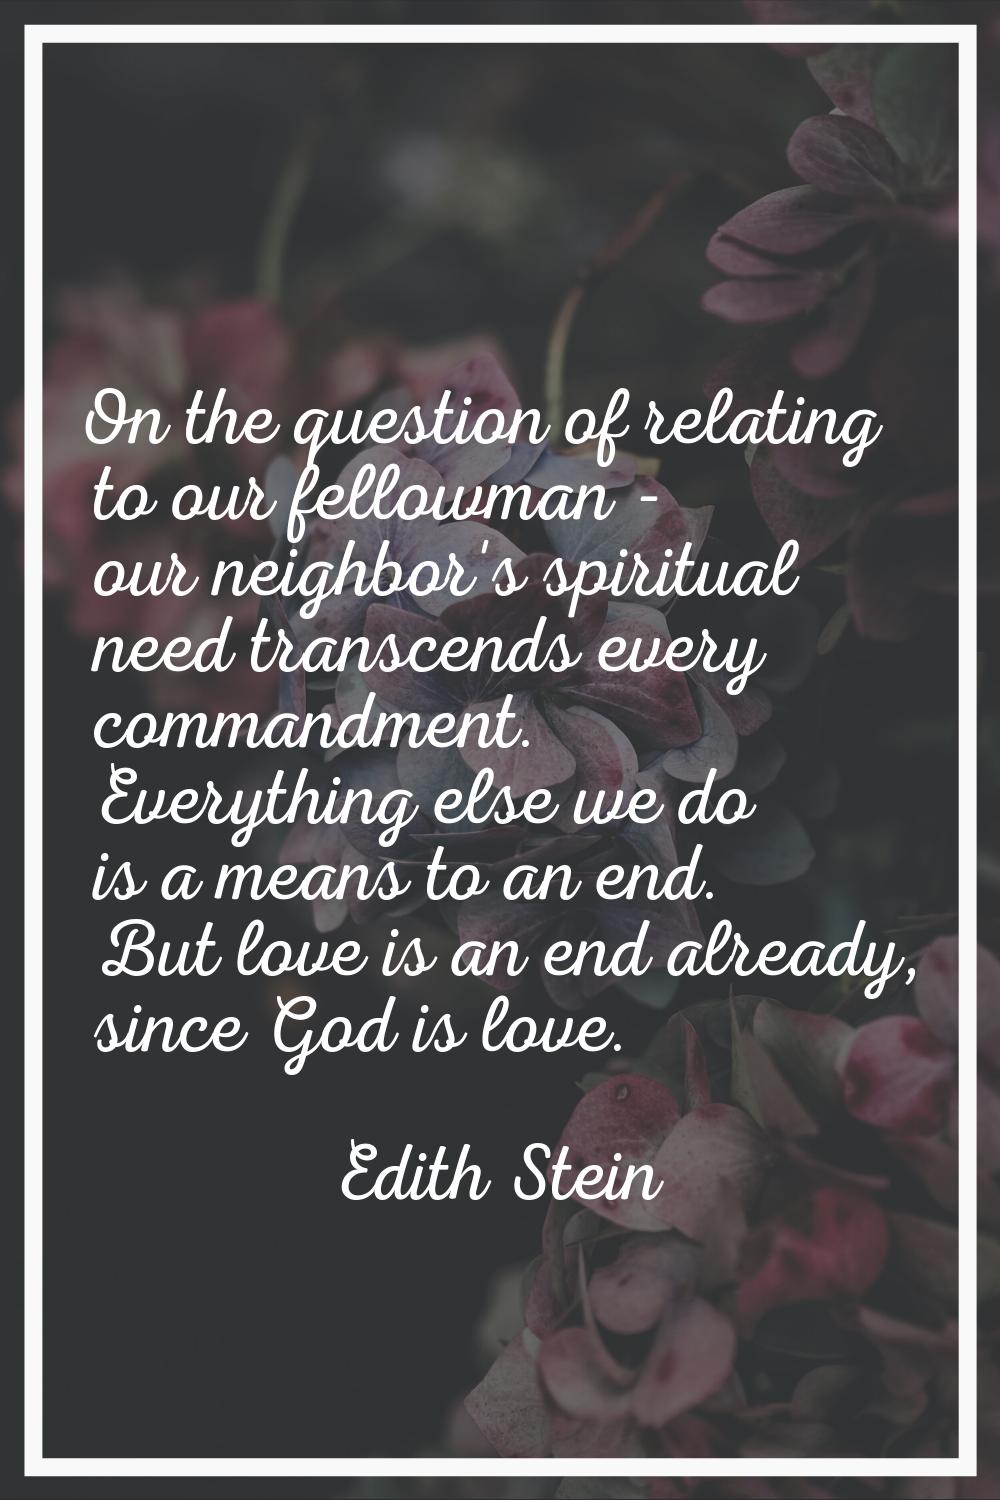 On the question of relating to our fellowman - our neighbor's spiritual need transcends every comma